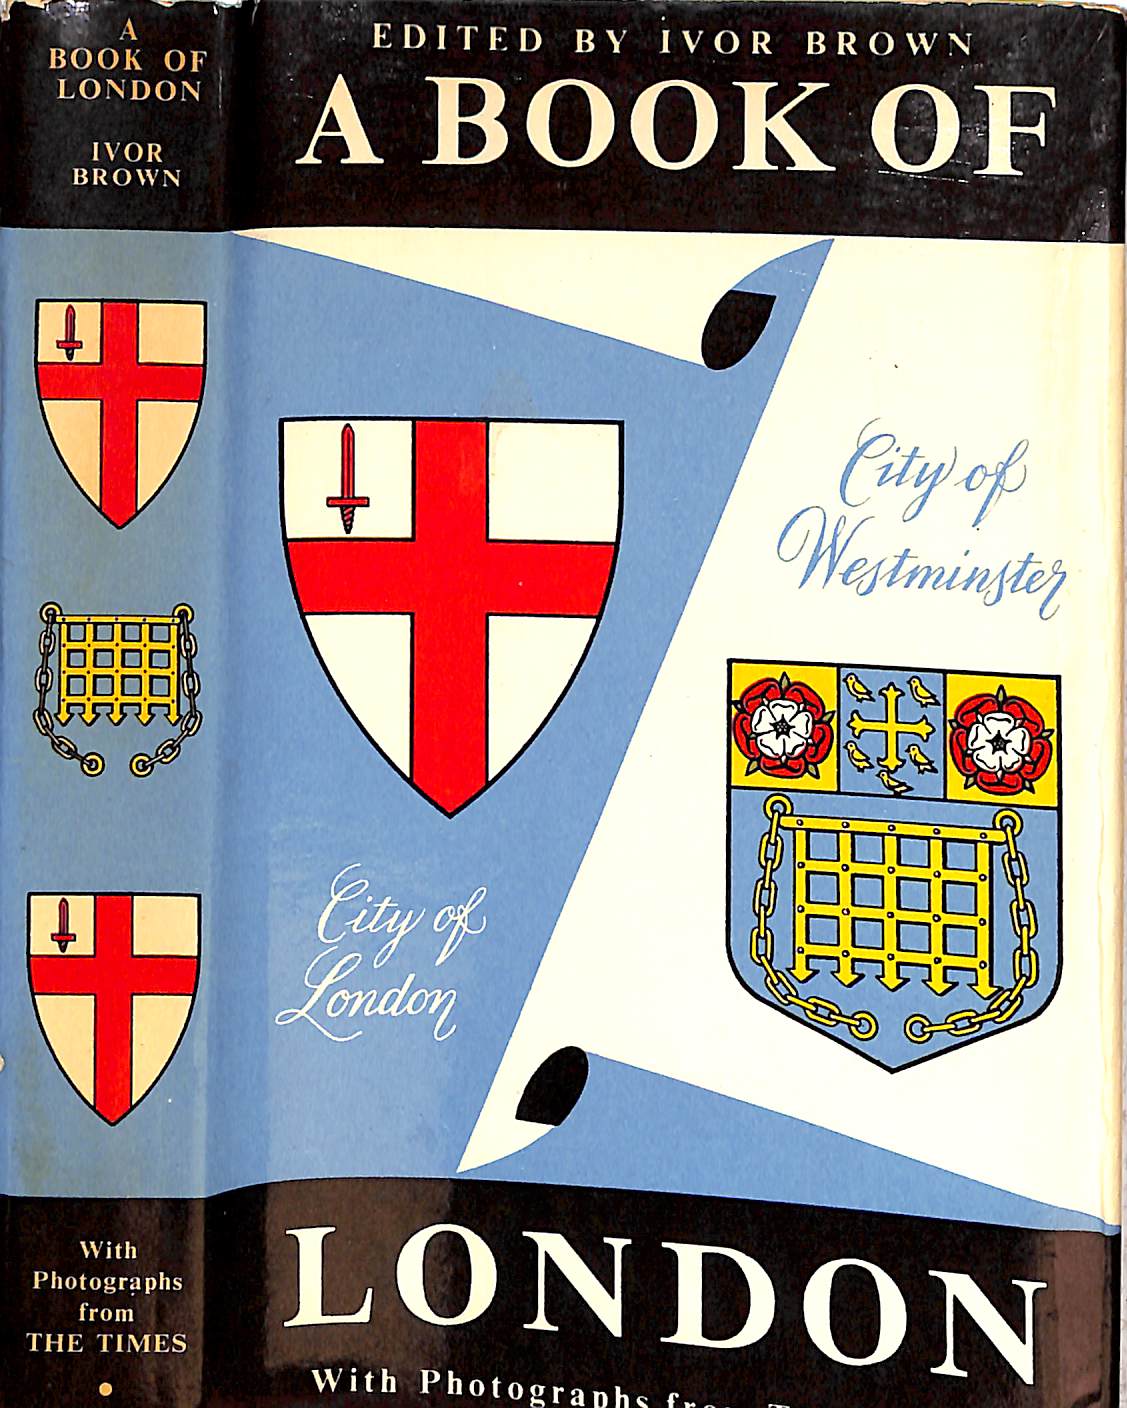 "A Book Of London" 1961 BROWN, Ivor [edited by]